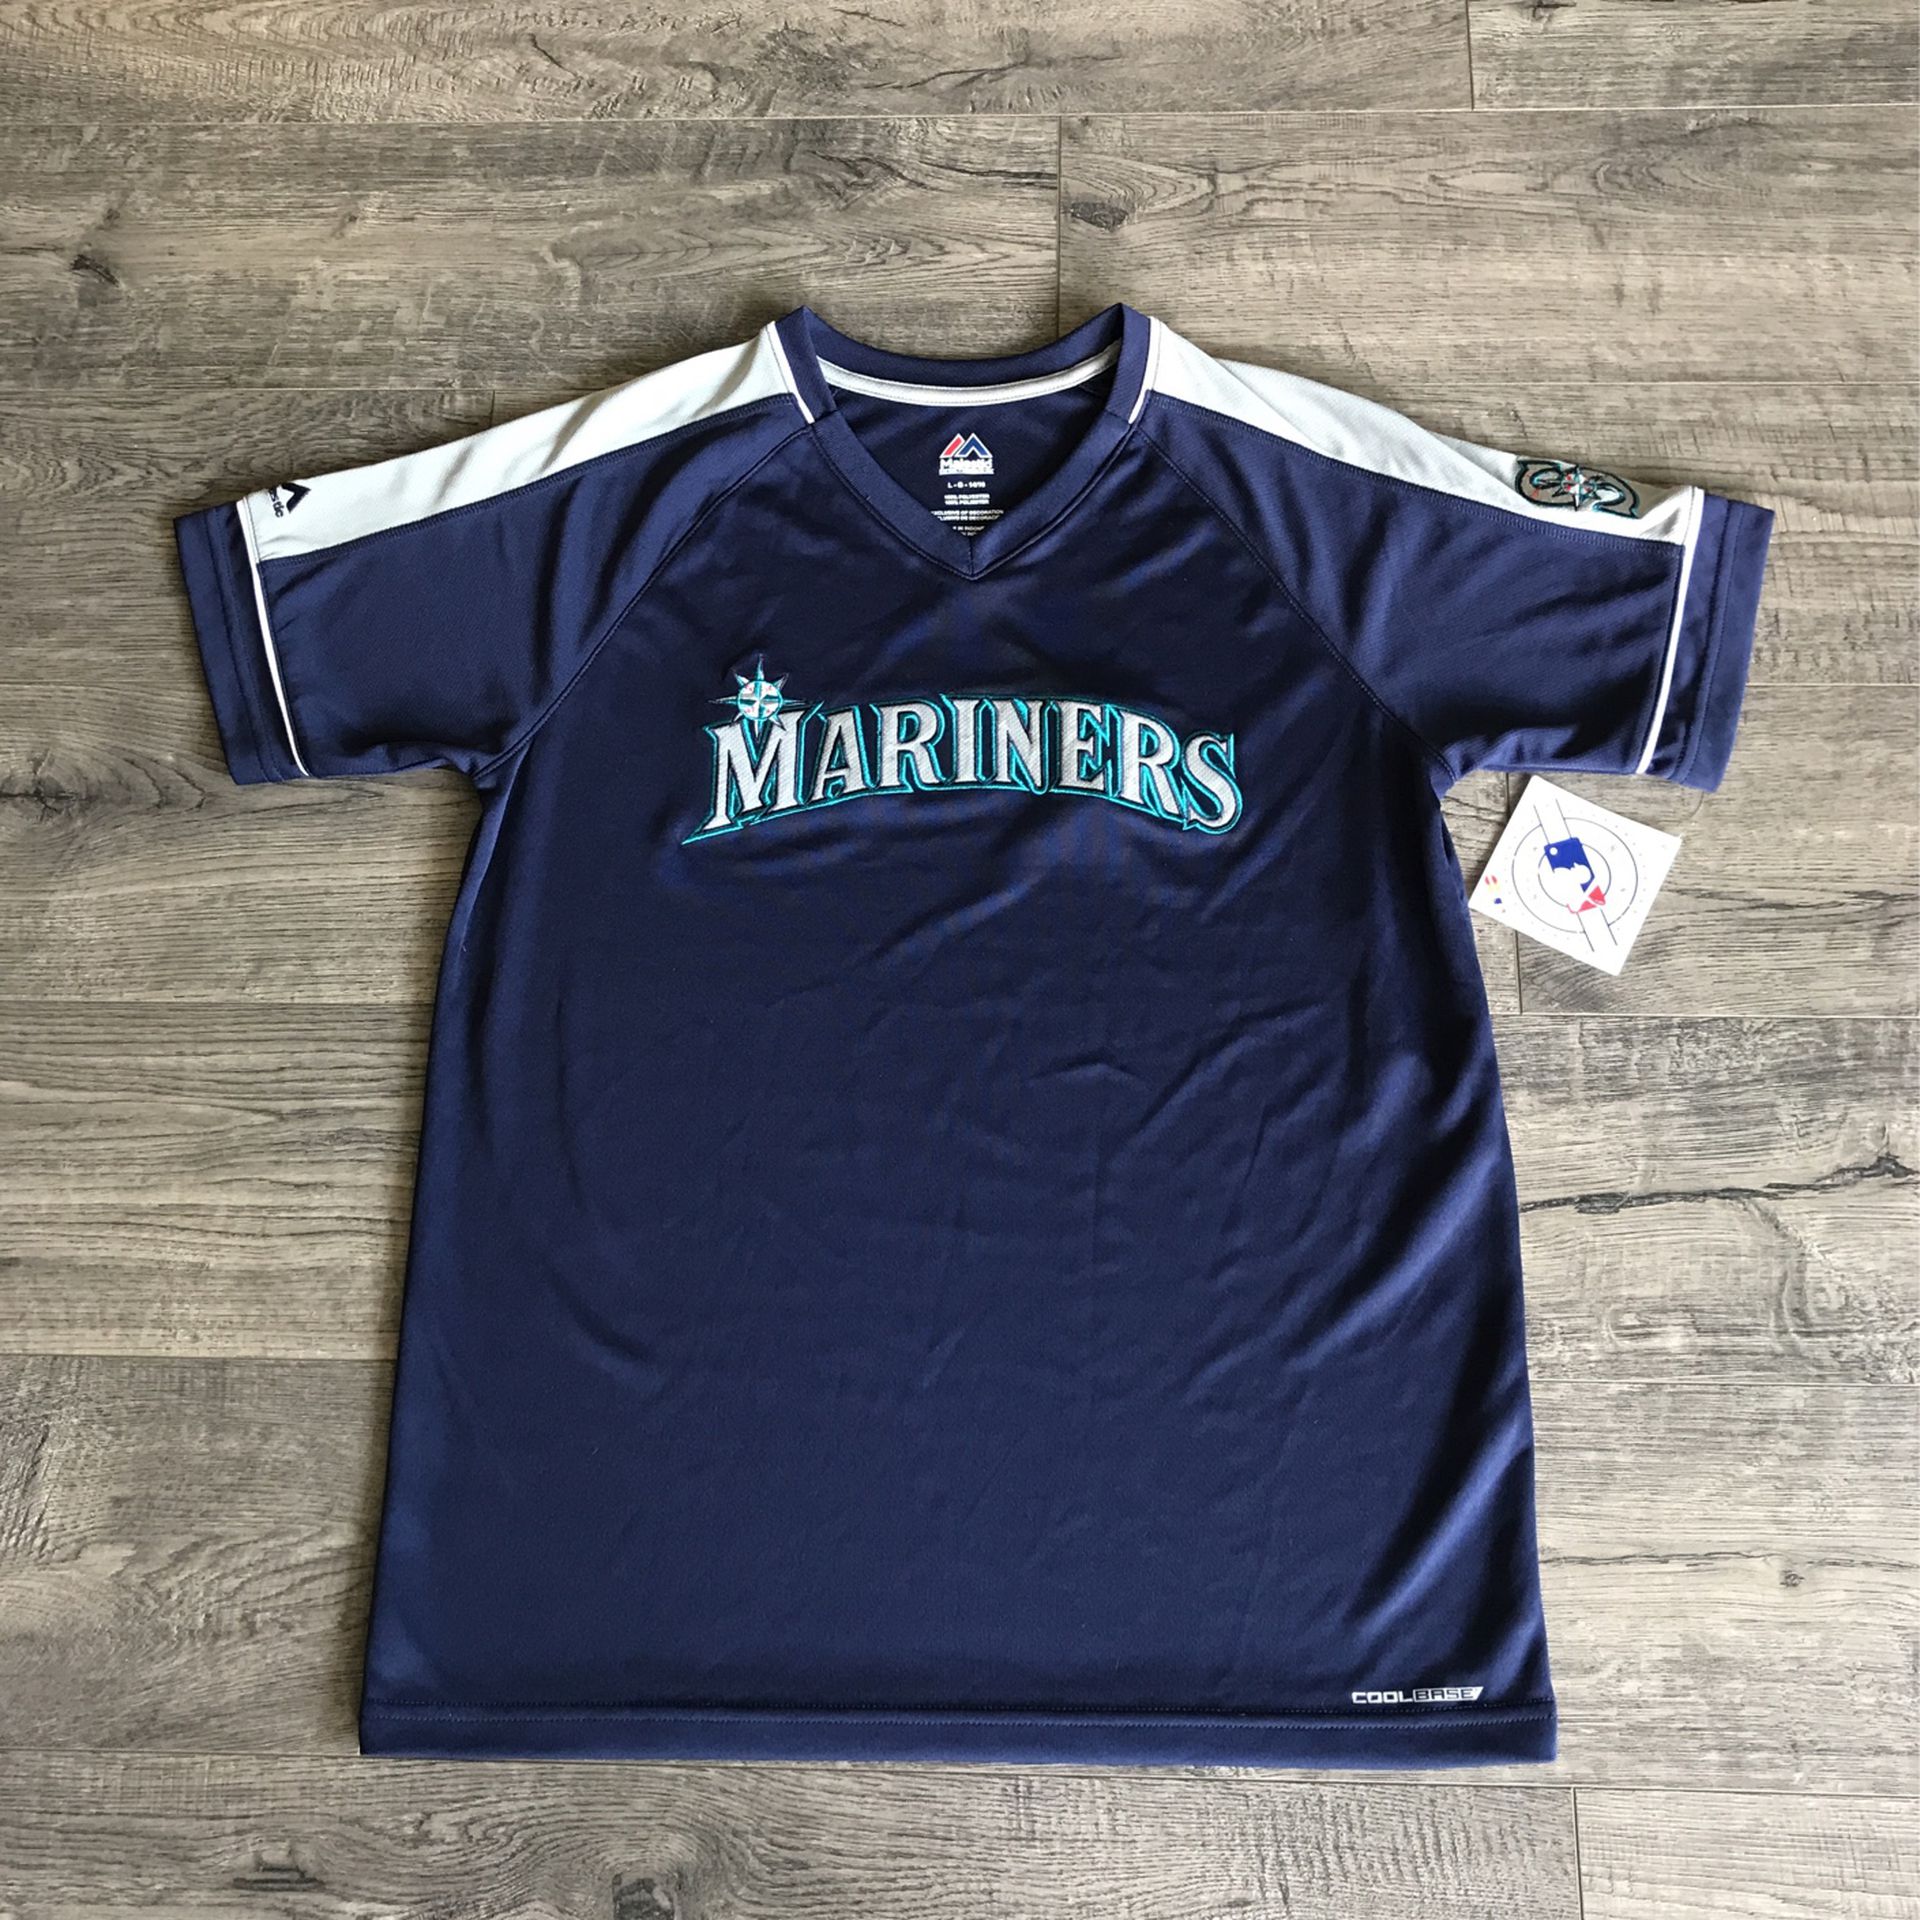 Seattle Mariners Youth Baseball Jersey for Sale in Tacoma, WA - OfferUp